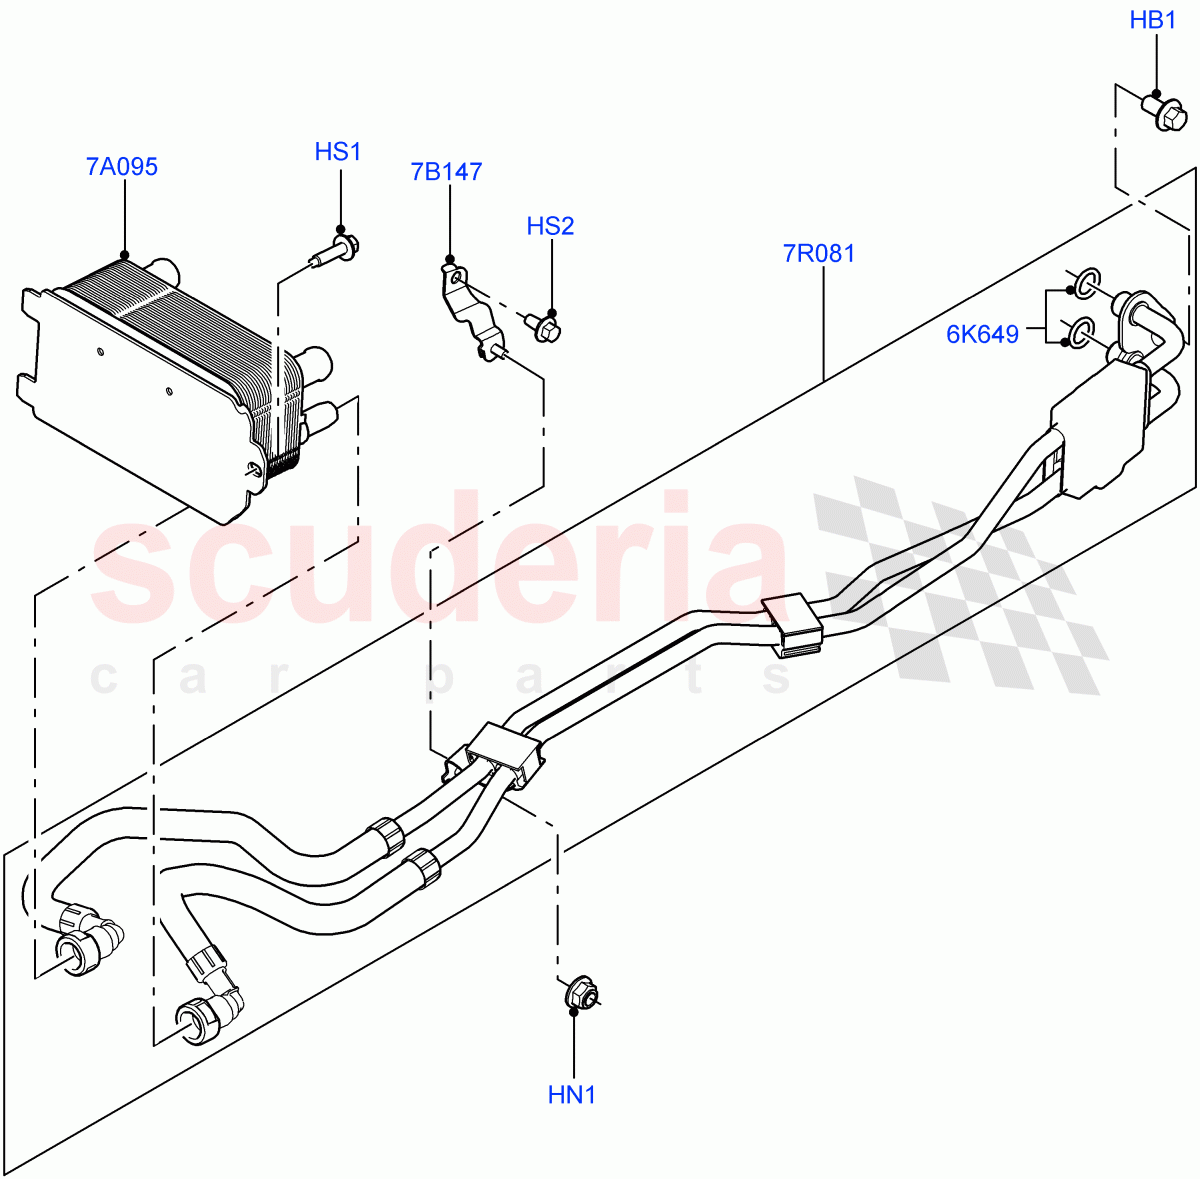 Transmission Cooling Systems(4.4L DOHC DITC V8 Diesel,8 Speed Auto Trans ZF 8HP76)((V)FROMKA000001) of Land Rover Land Rover Range Rover Sport (2014+) [3.0 DOHC GDI SC V6 Petrol]